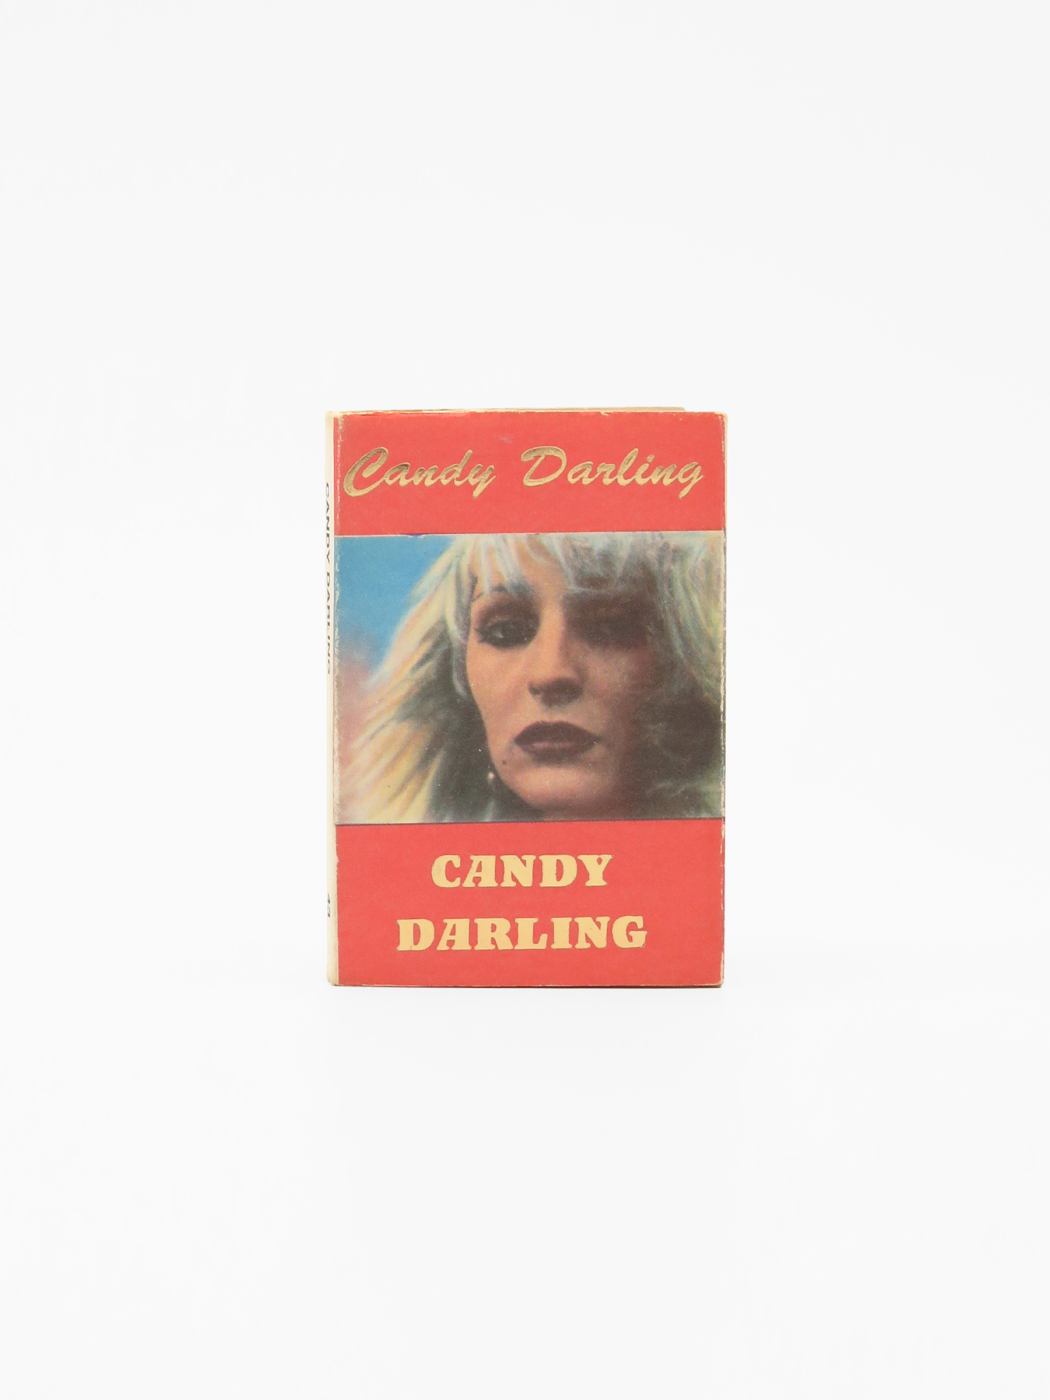 Candy Darling, Candy Darling